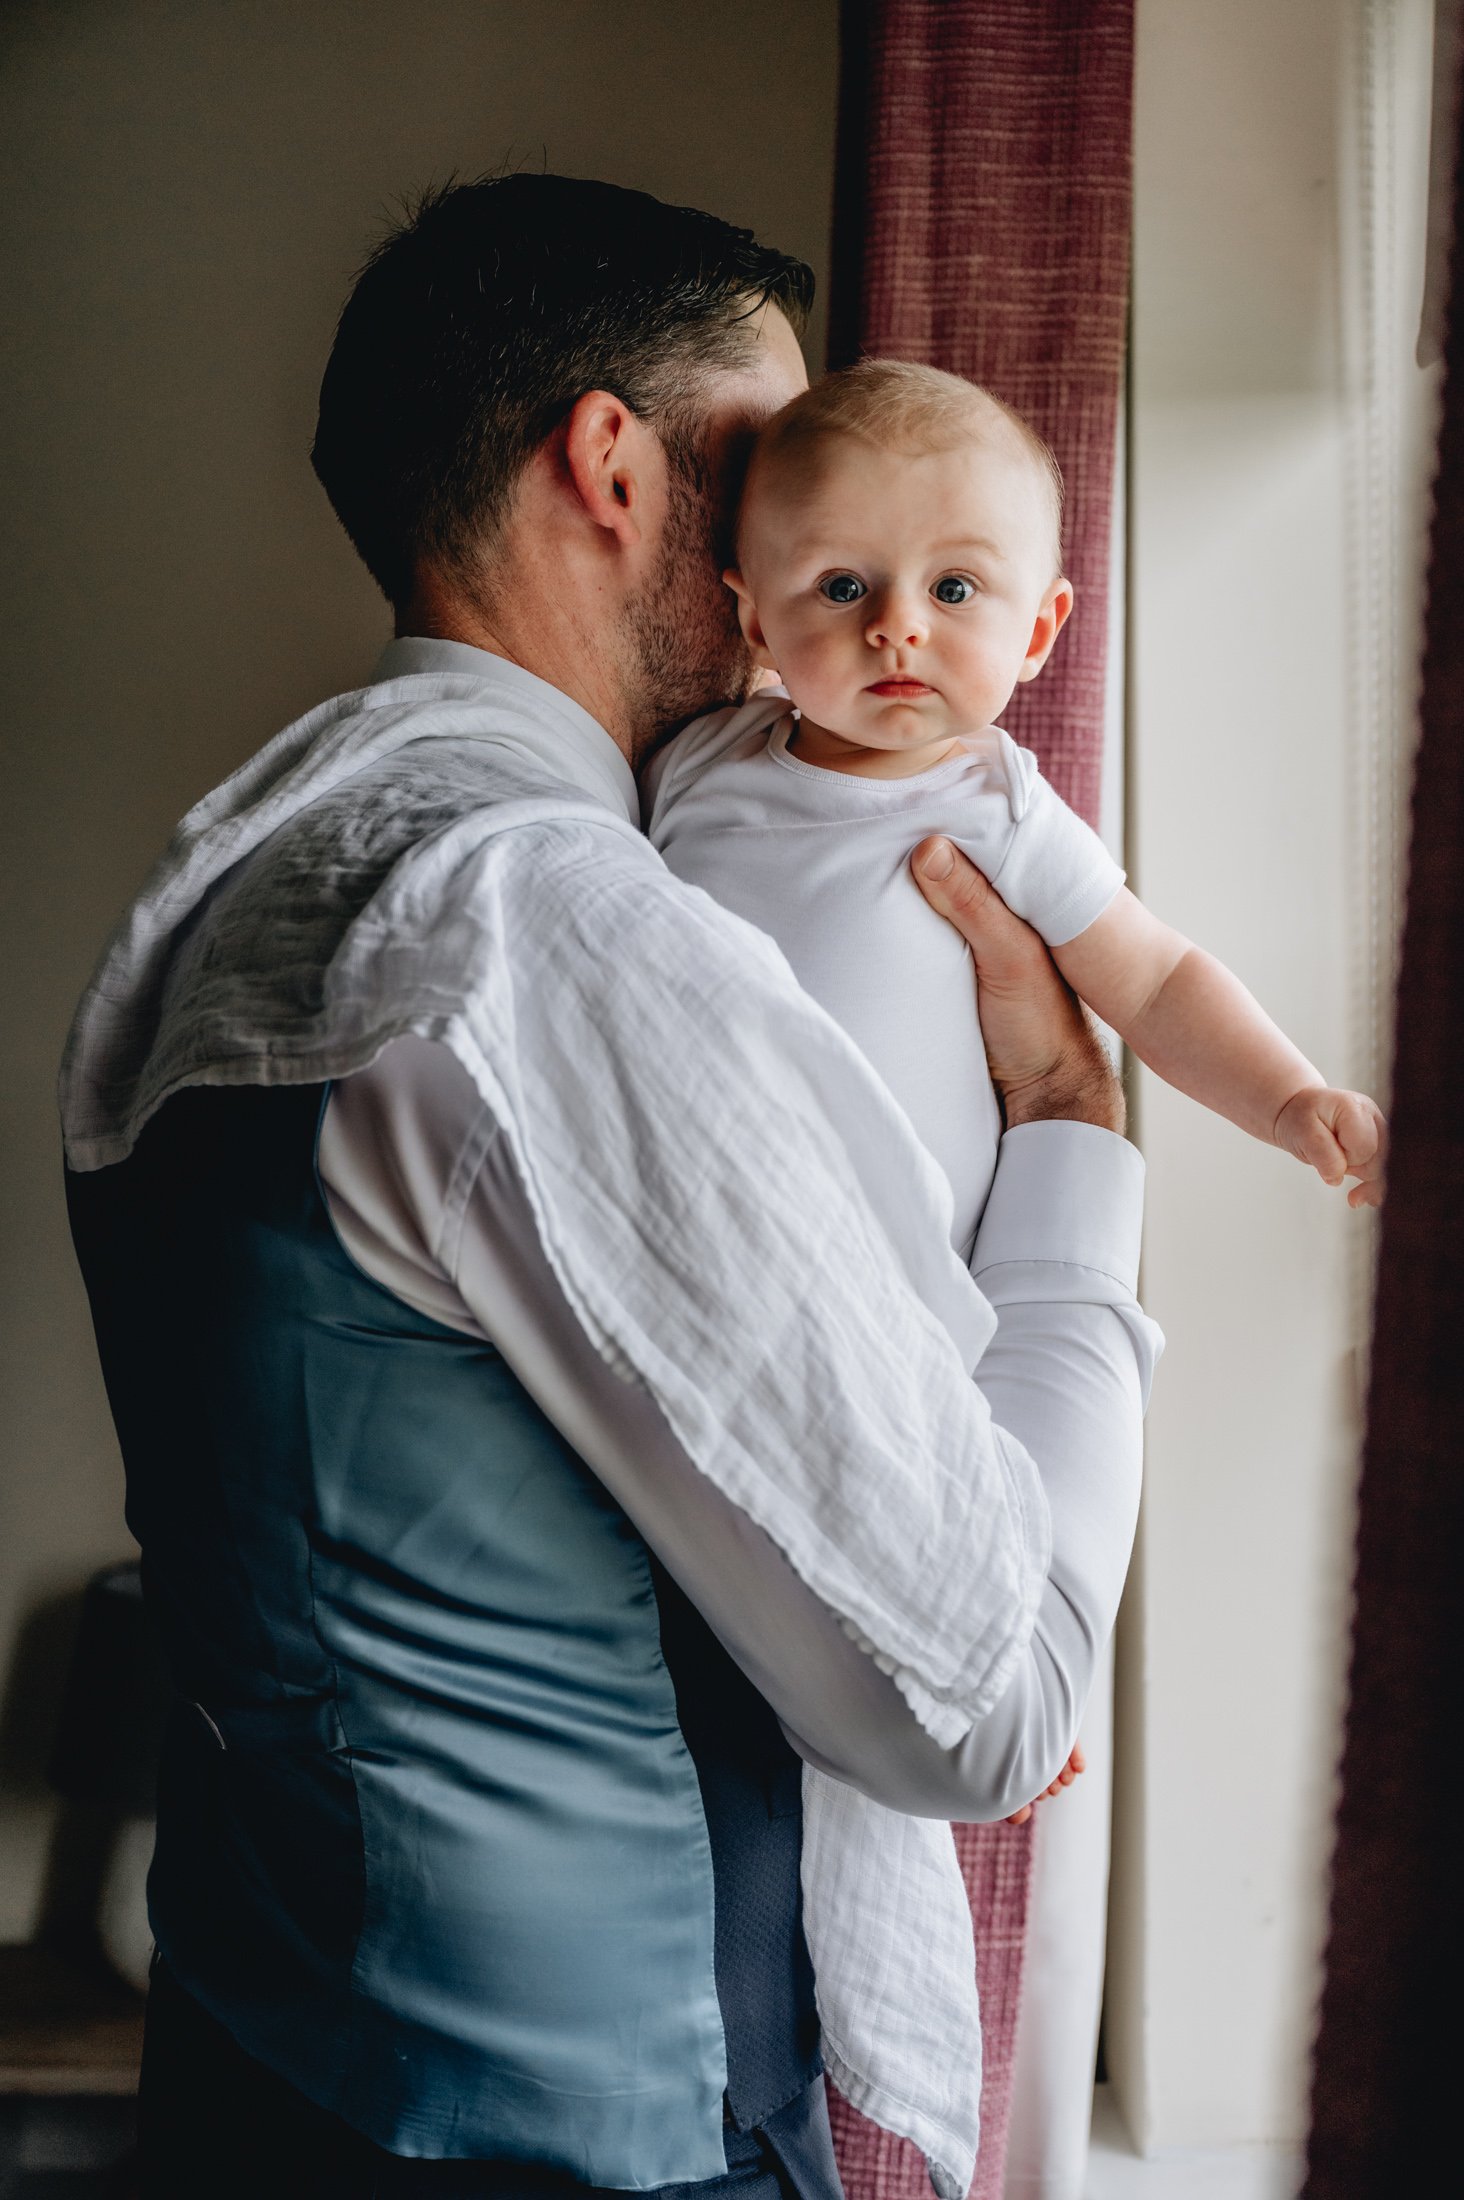 man with burp cloth holding baby boy near window in home family photo christening photos limerick photographer